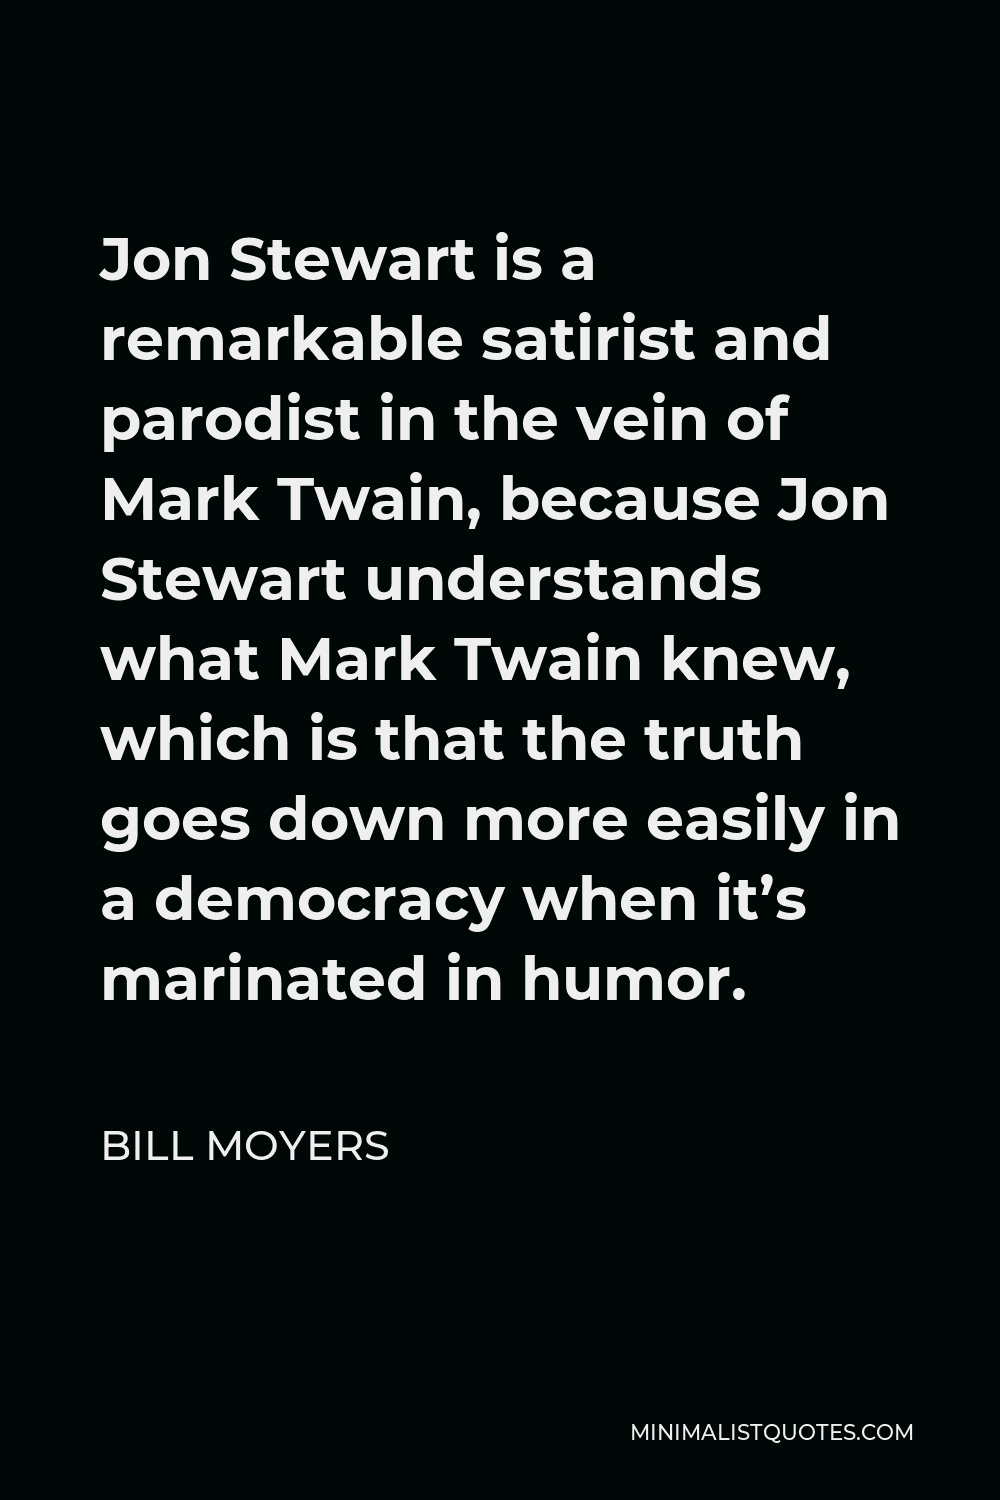 Bill Moyers Quote - Jon Stewart is a remarkable satirist and parodist in the vein of Mark Twain, because Jon Stewart understands what Mark Twain knew, which is that the truth goes down more easily in a democracy when it’s marinated in humor.